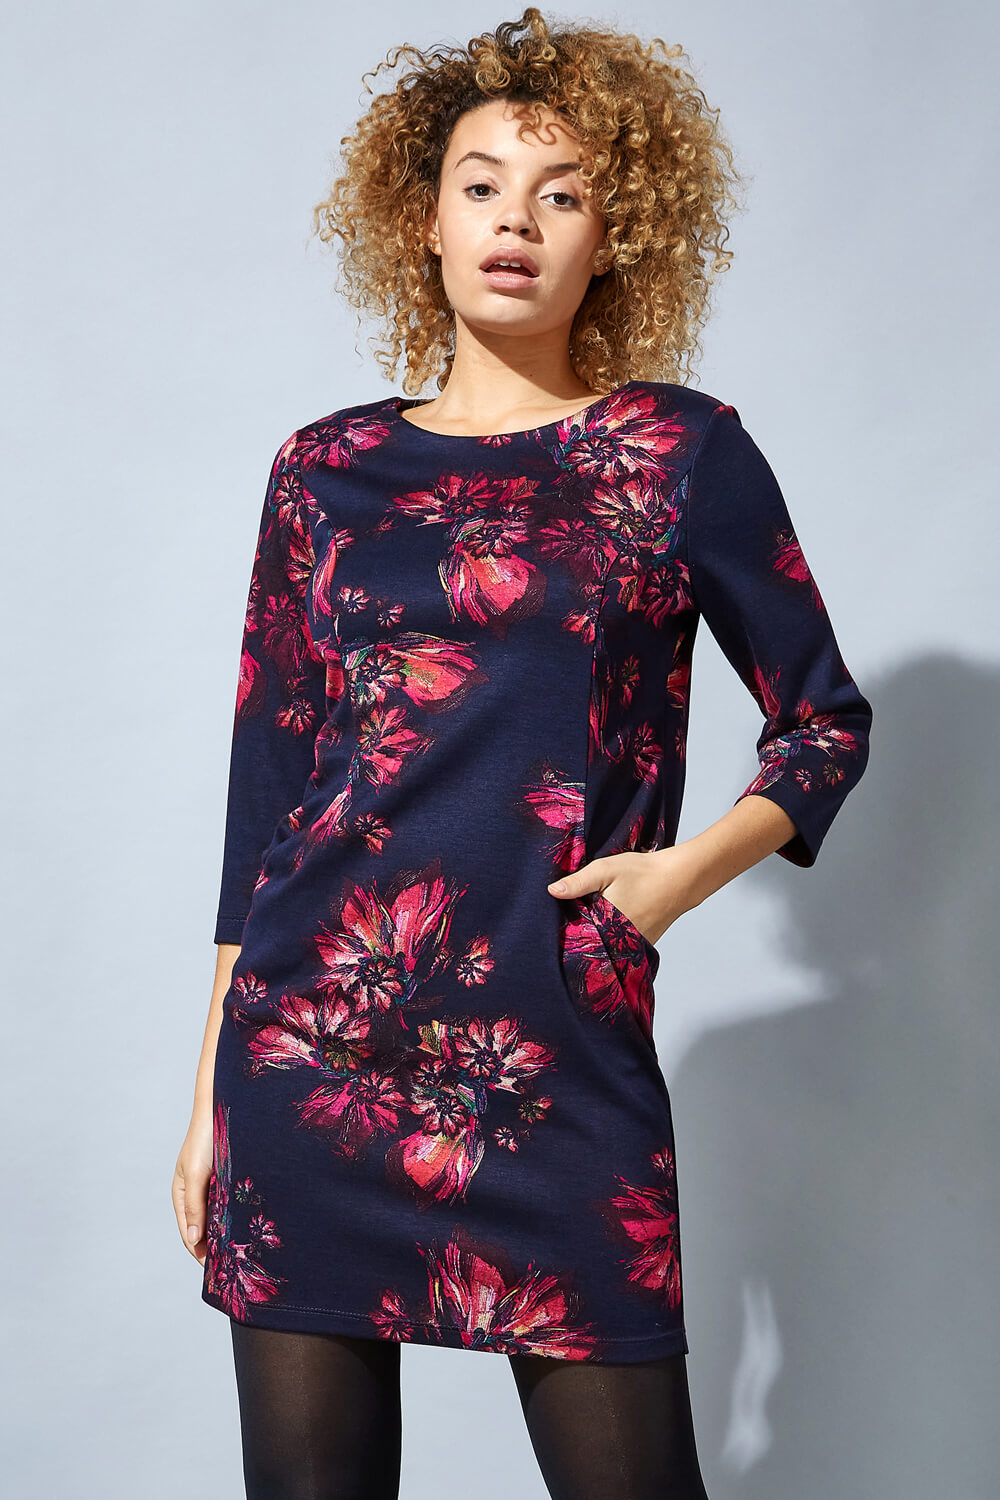 Abstract Floral Shift Dress